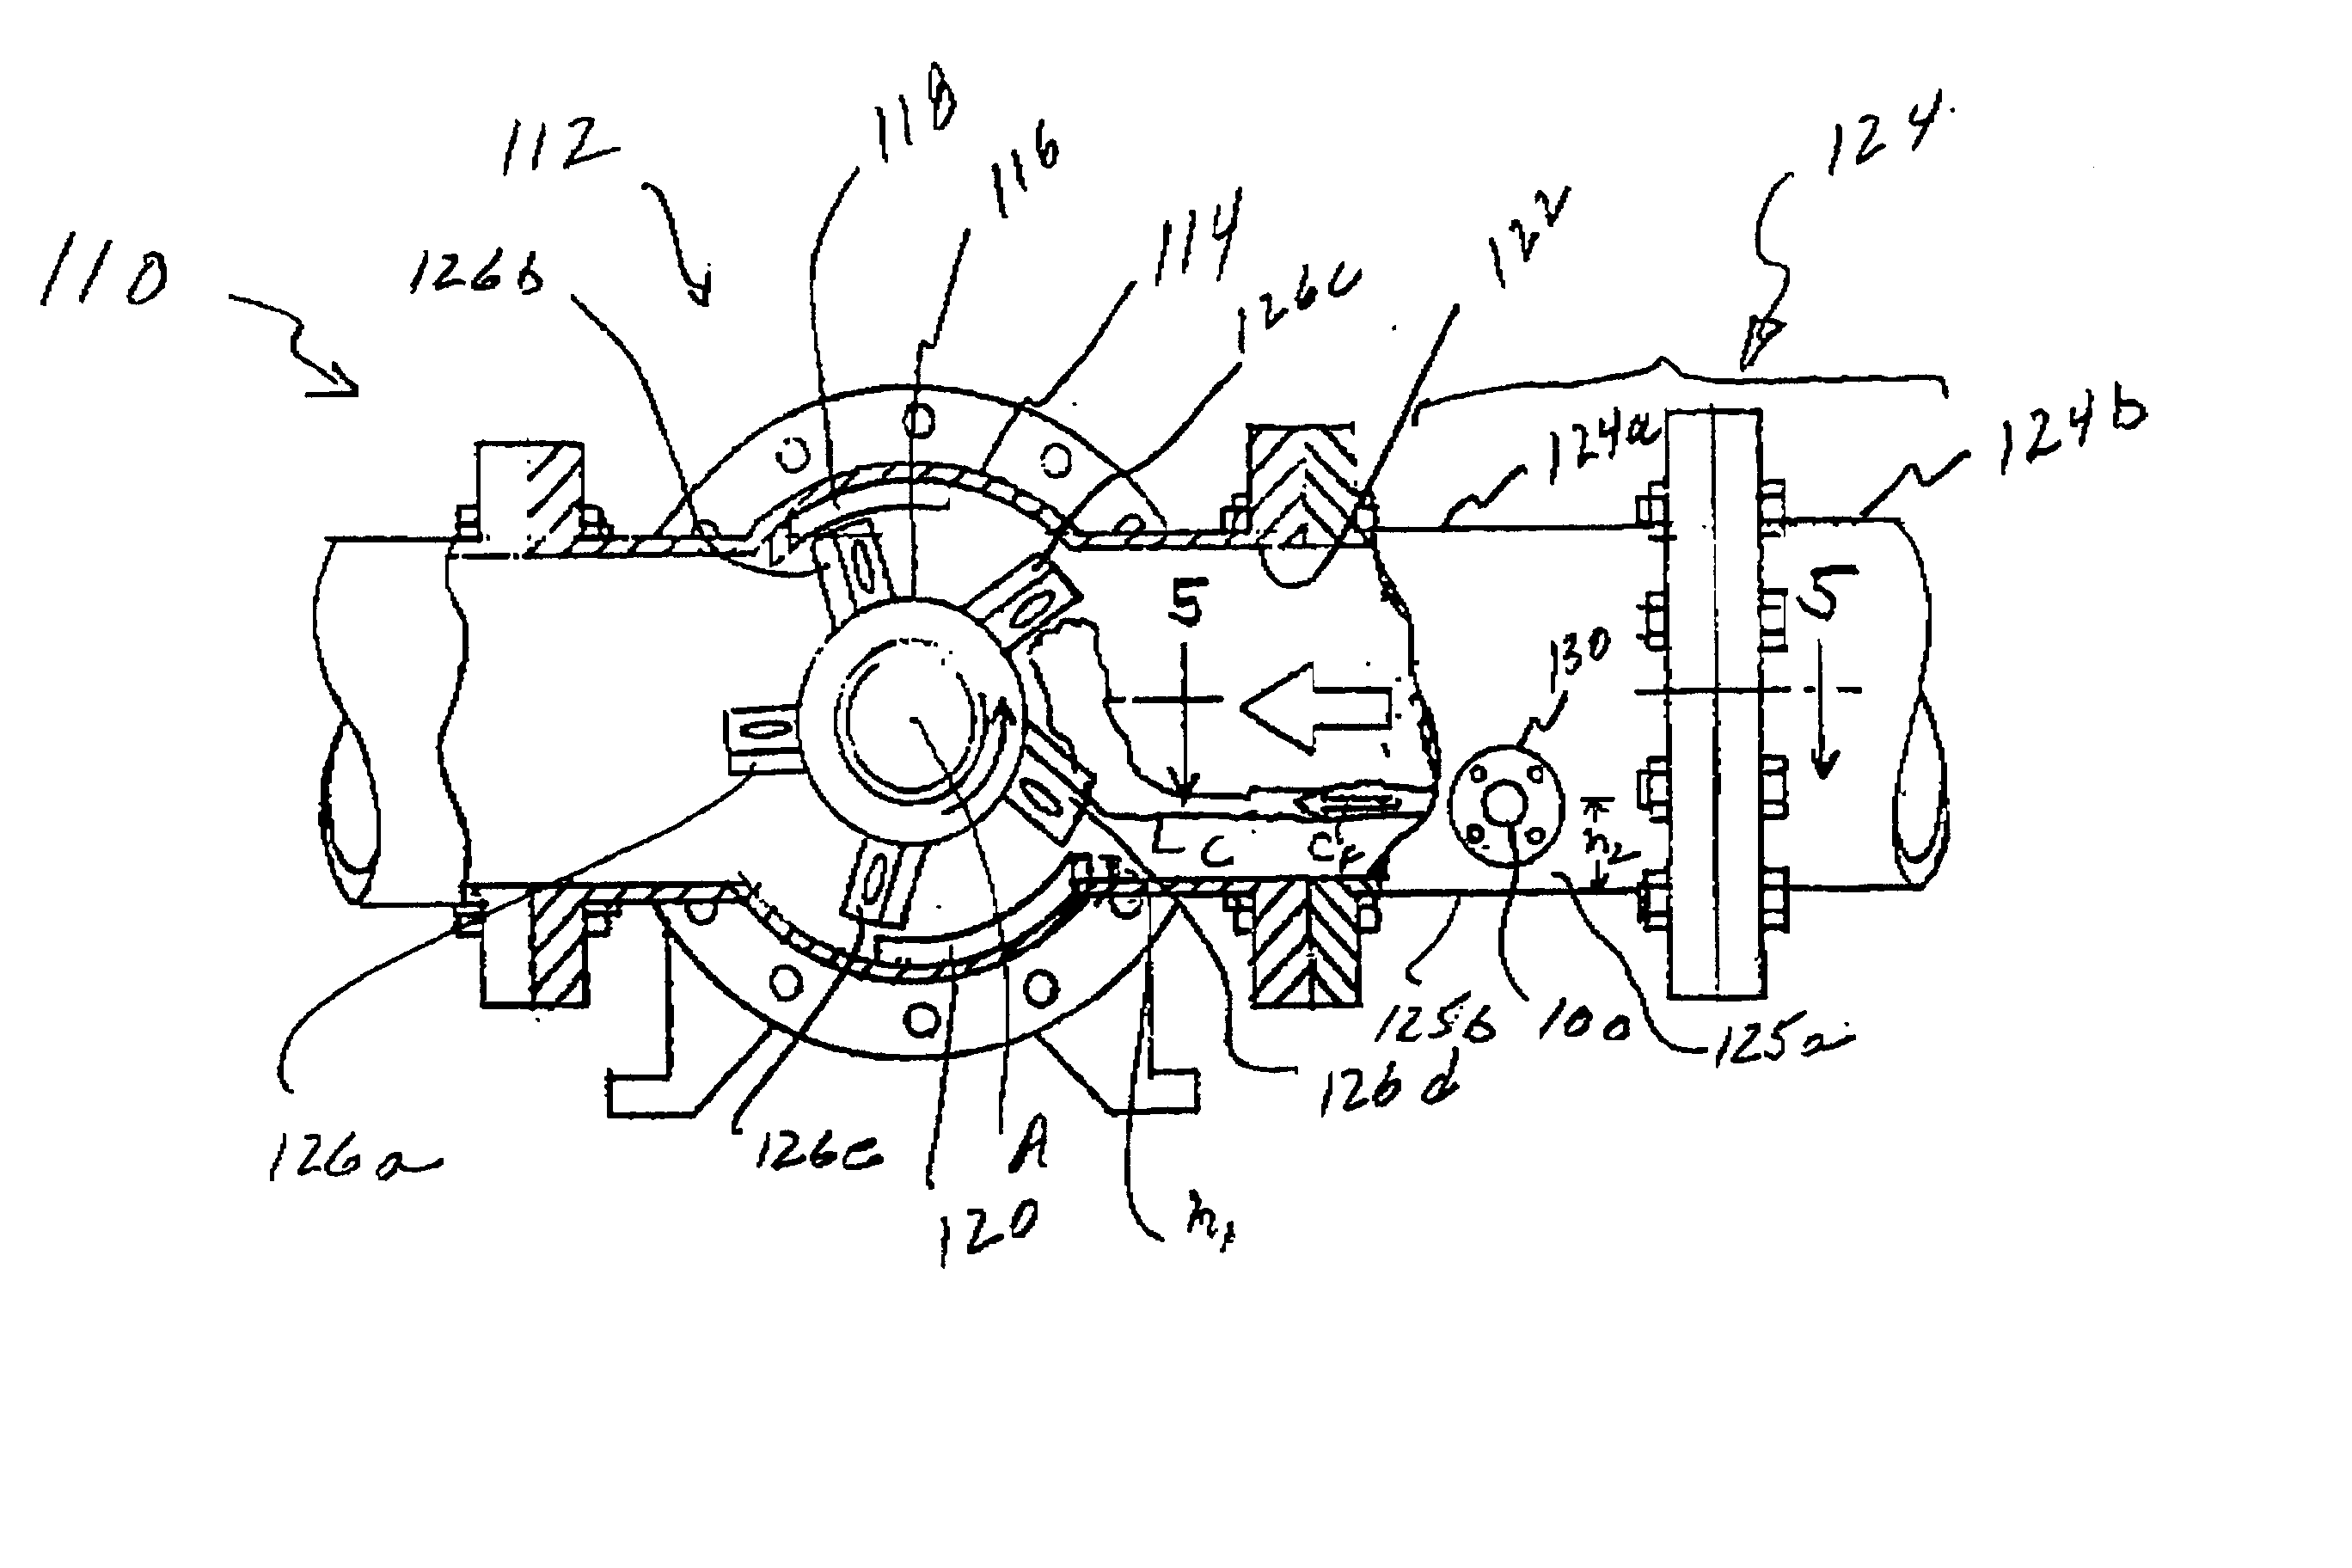 Method and apparatus for injecting a chemical into a process upstream of an inline mixer